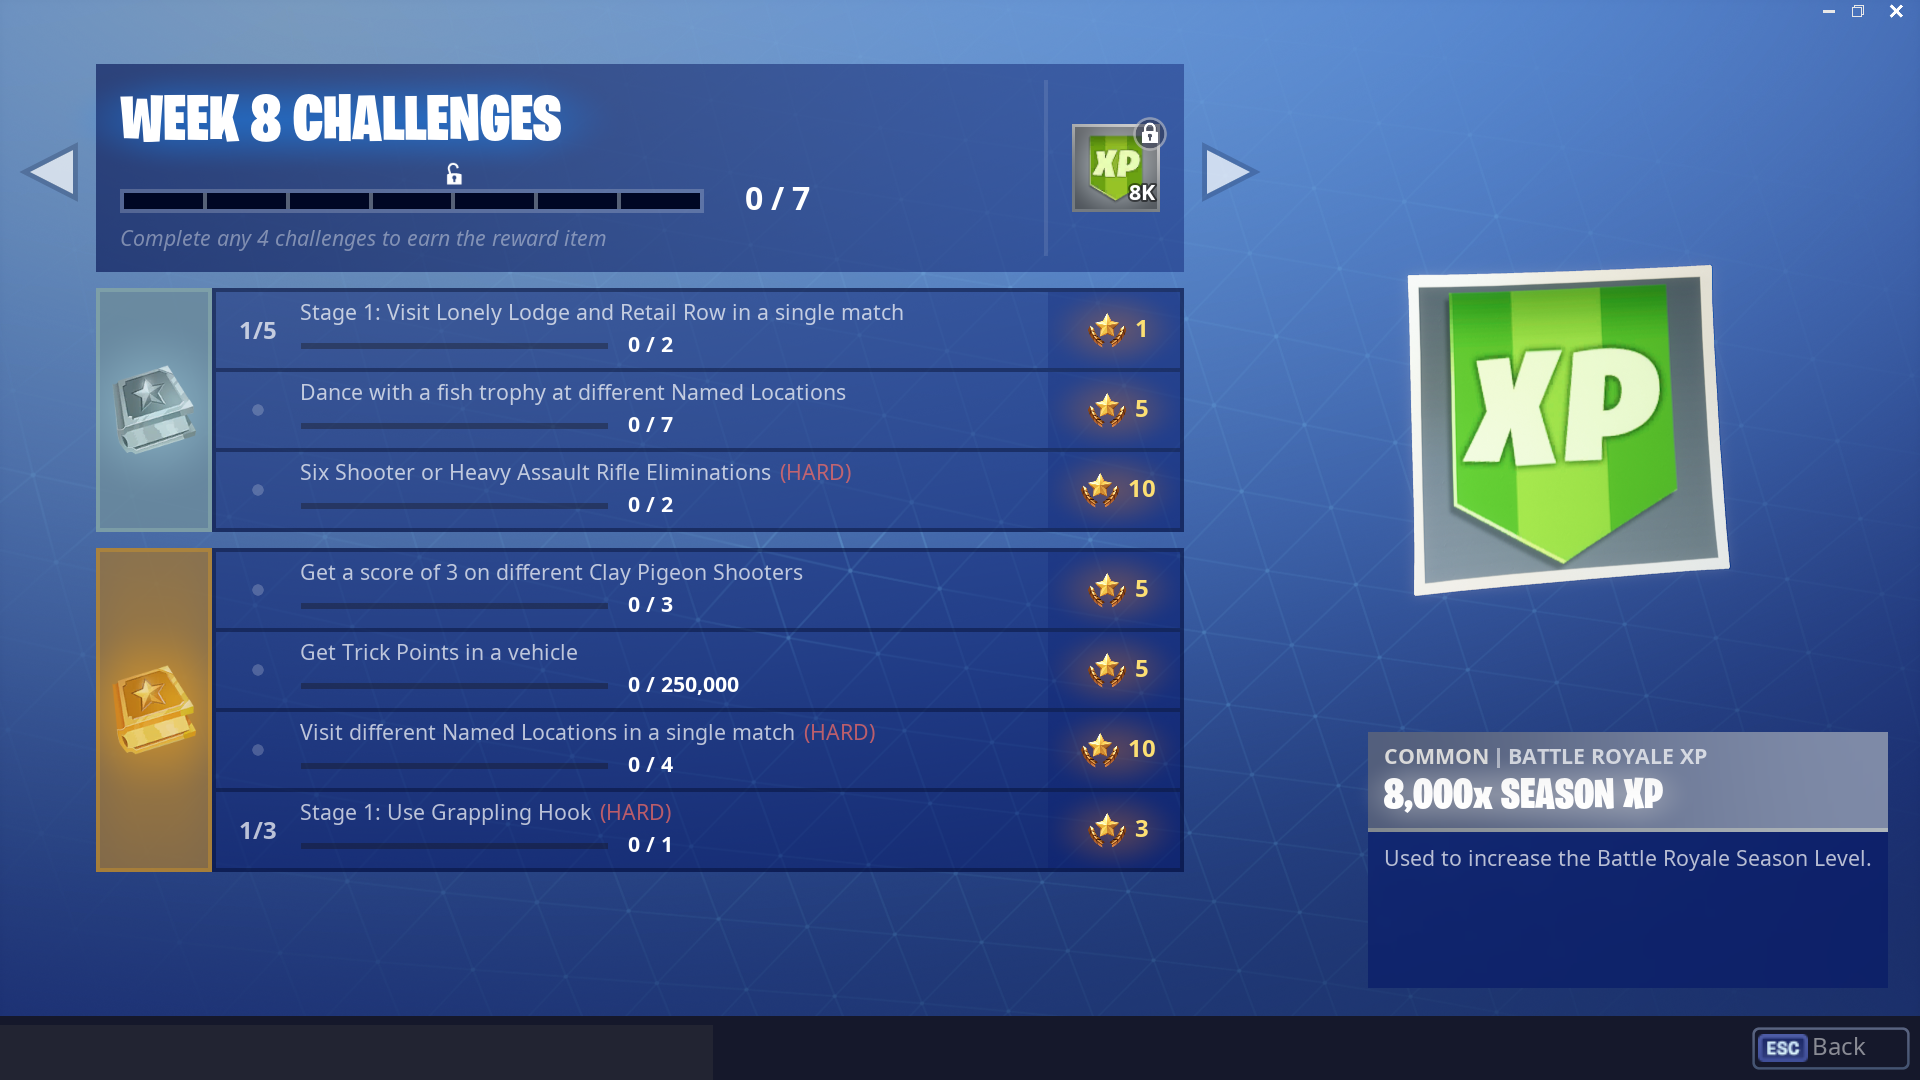 battle pass challenges and solutions for fortnite battle royale week 8 season 6 fortnite news and statistics ss1 - fortnite season 6 week 8